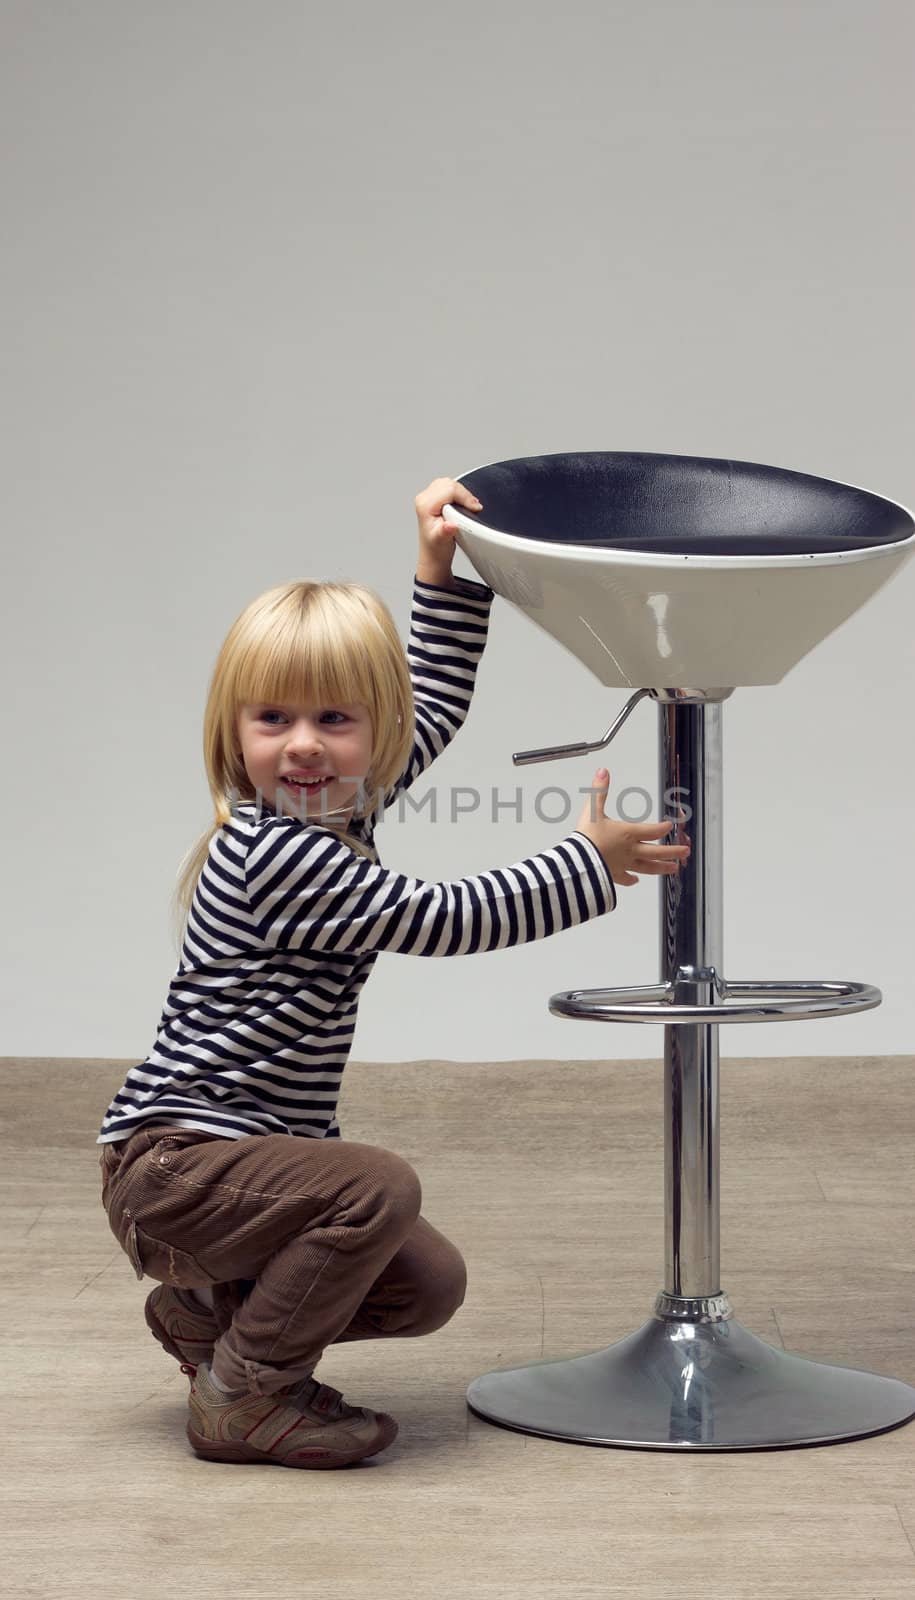 Blonde girl 3 years sat near a high chair and doing something